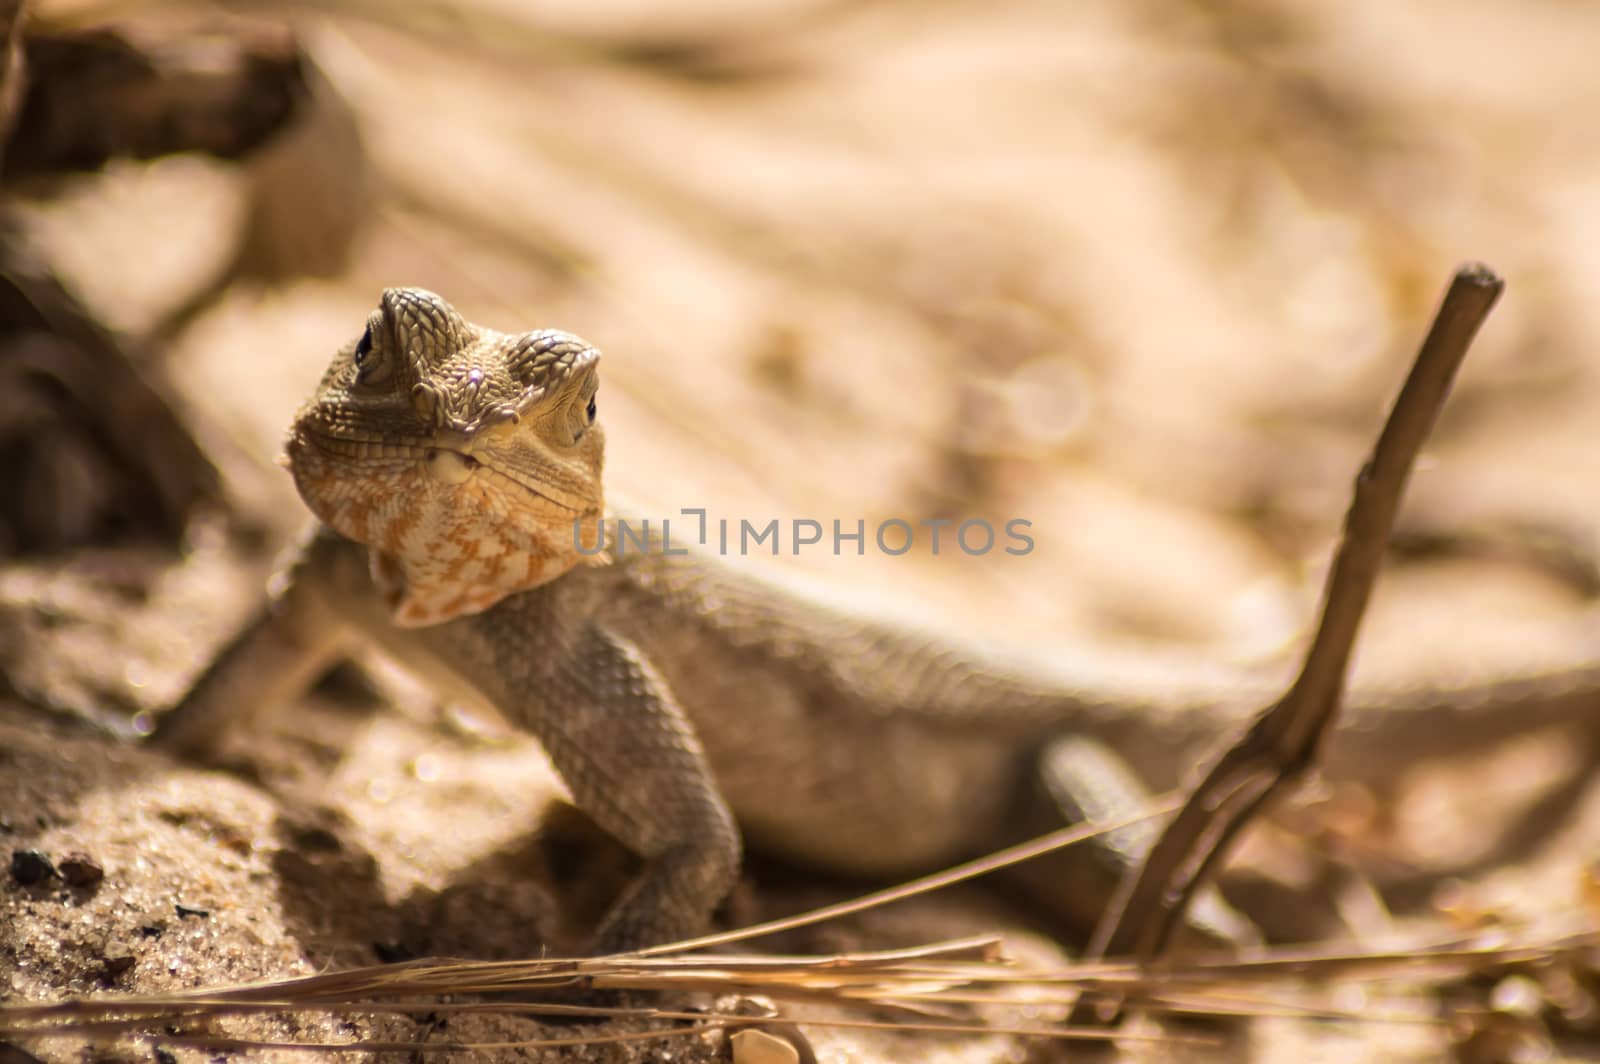 Lizard on a beach in Gambia, Agama Lizard  by Philou1000